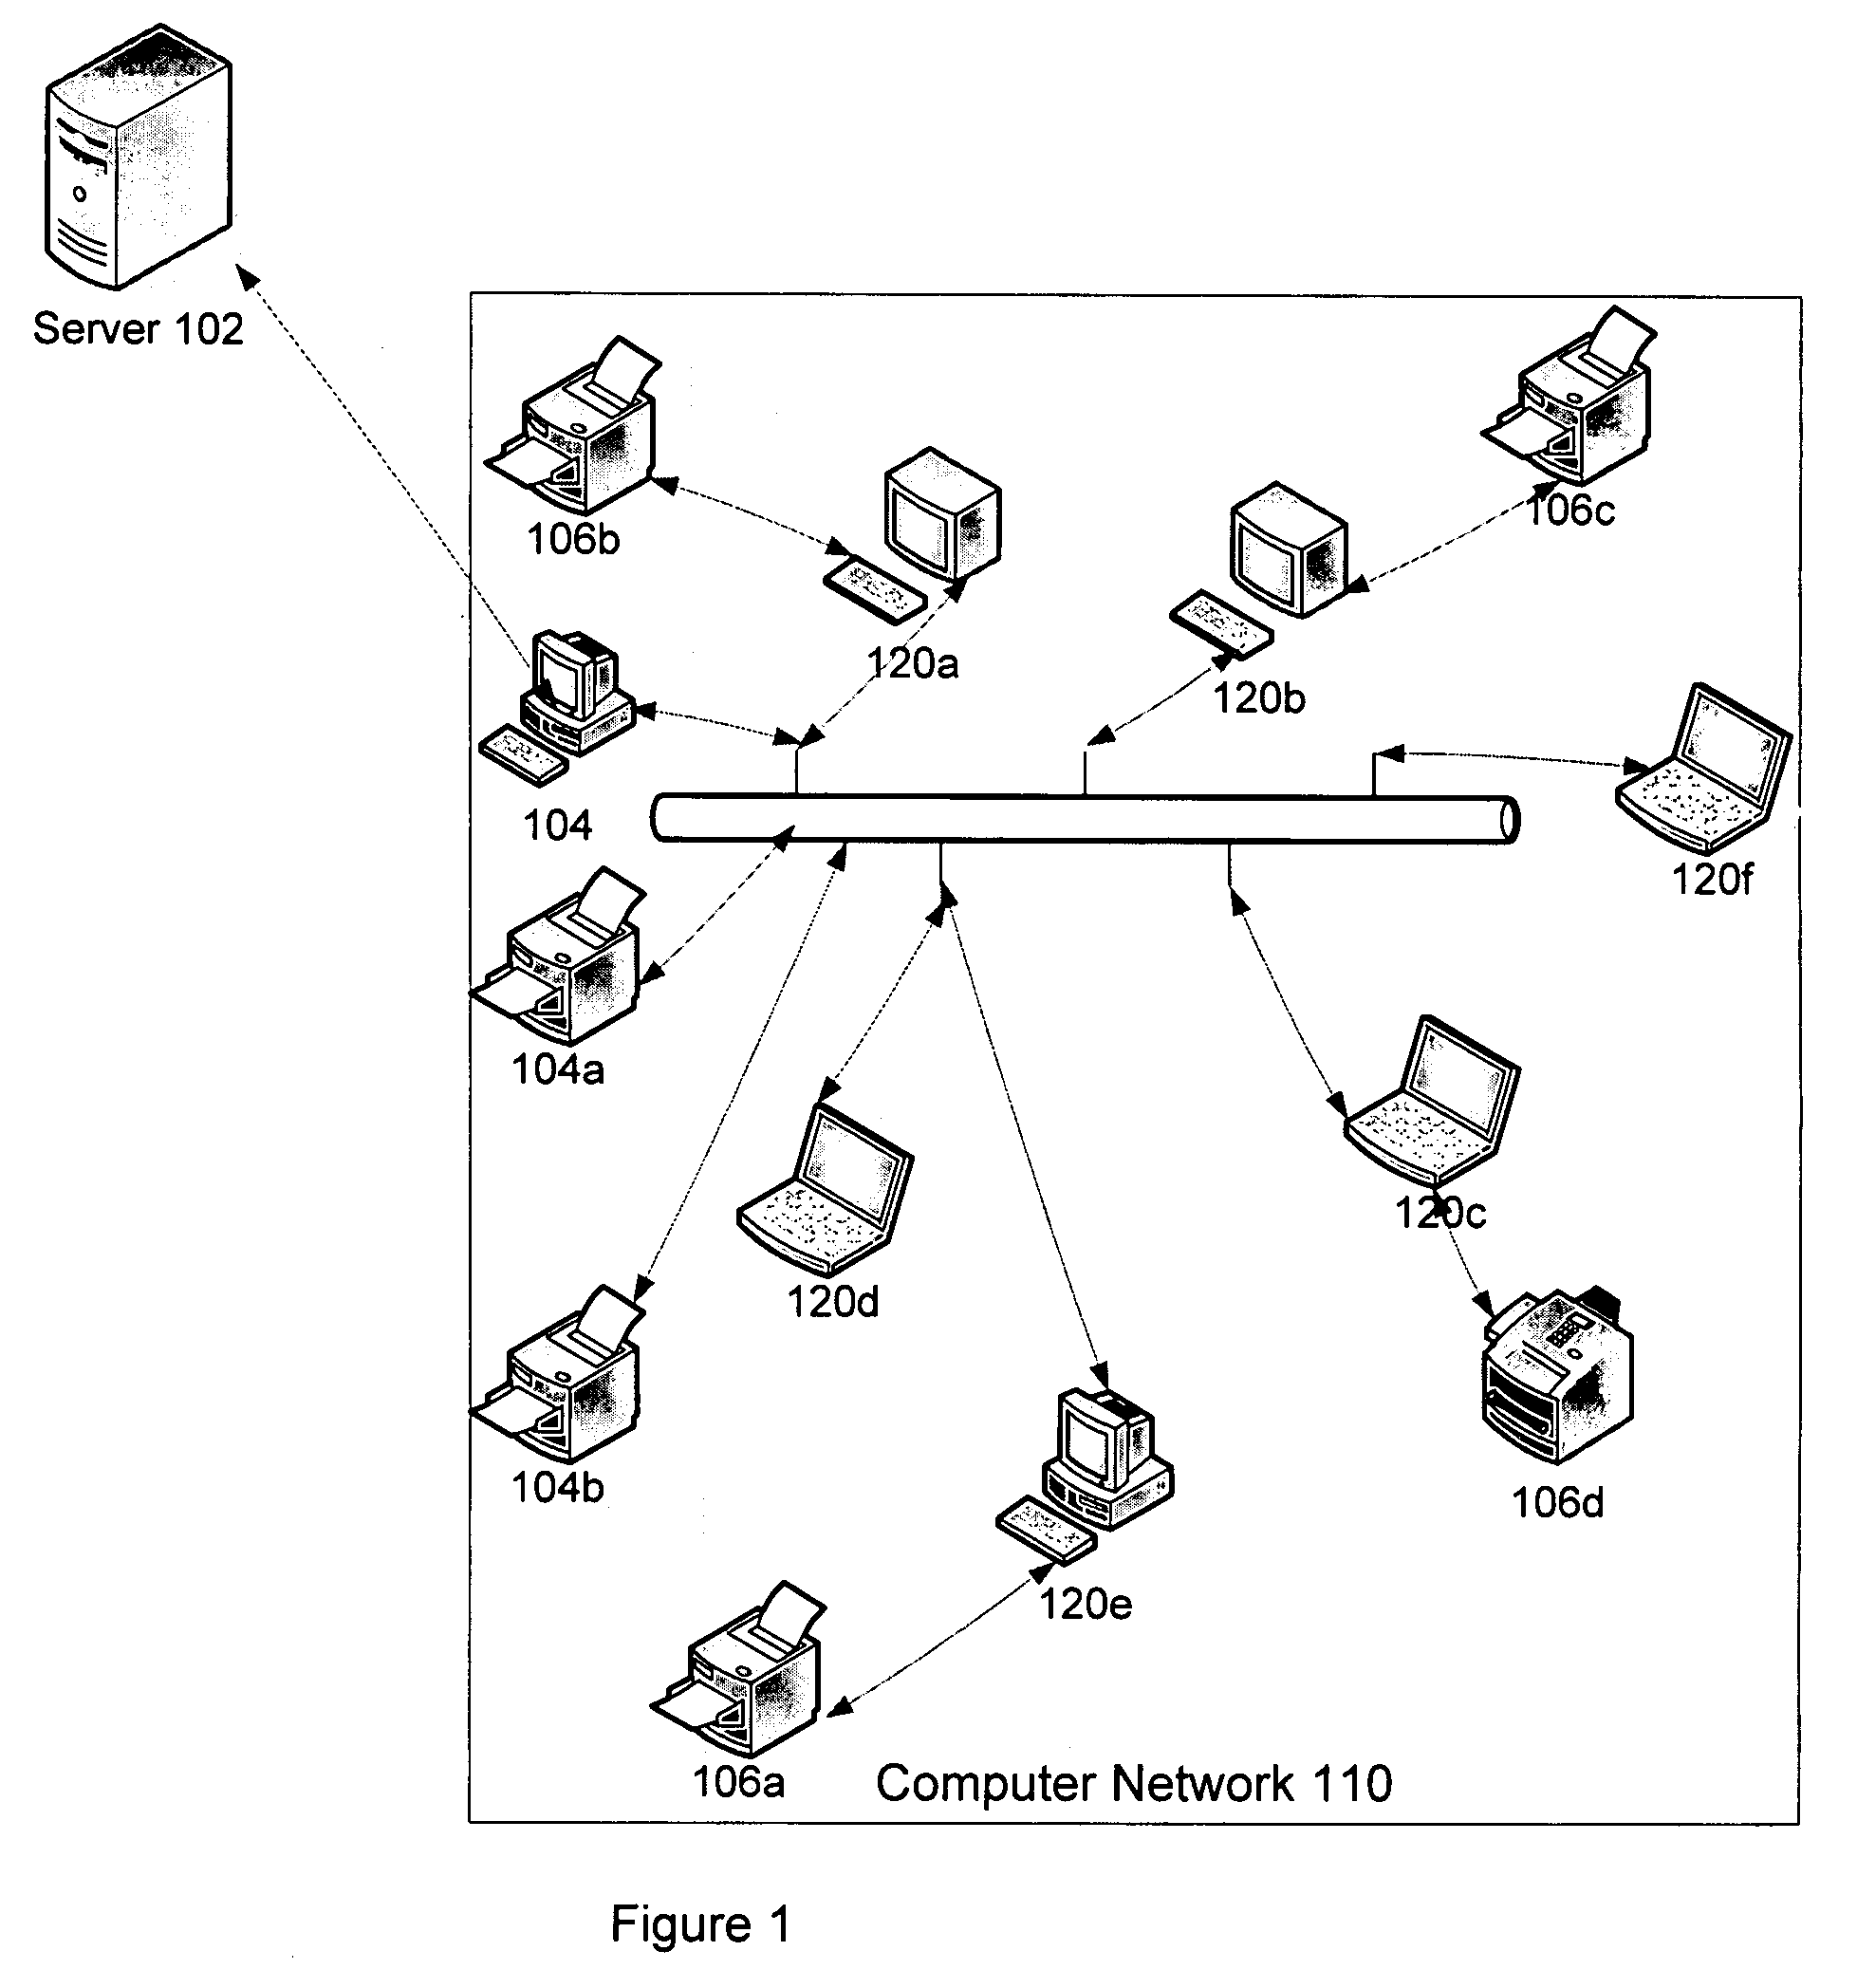 Apparatus and method for metering, monitoring and providing real time enterprise printing information